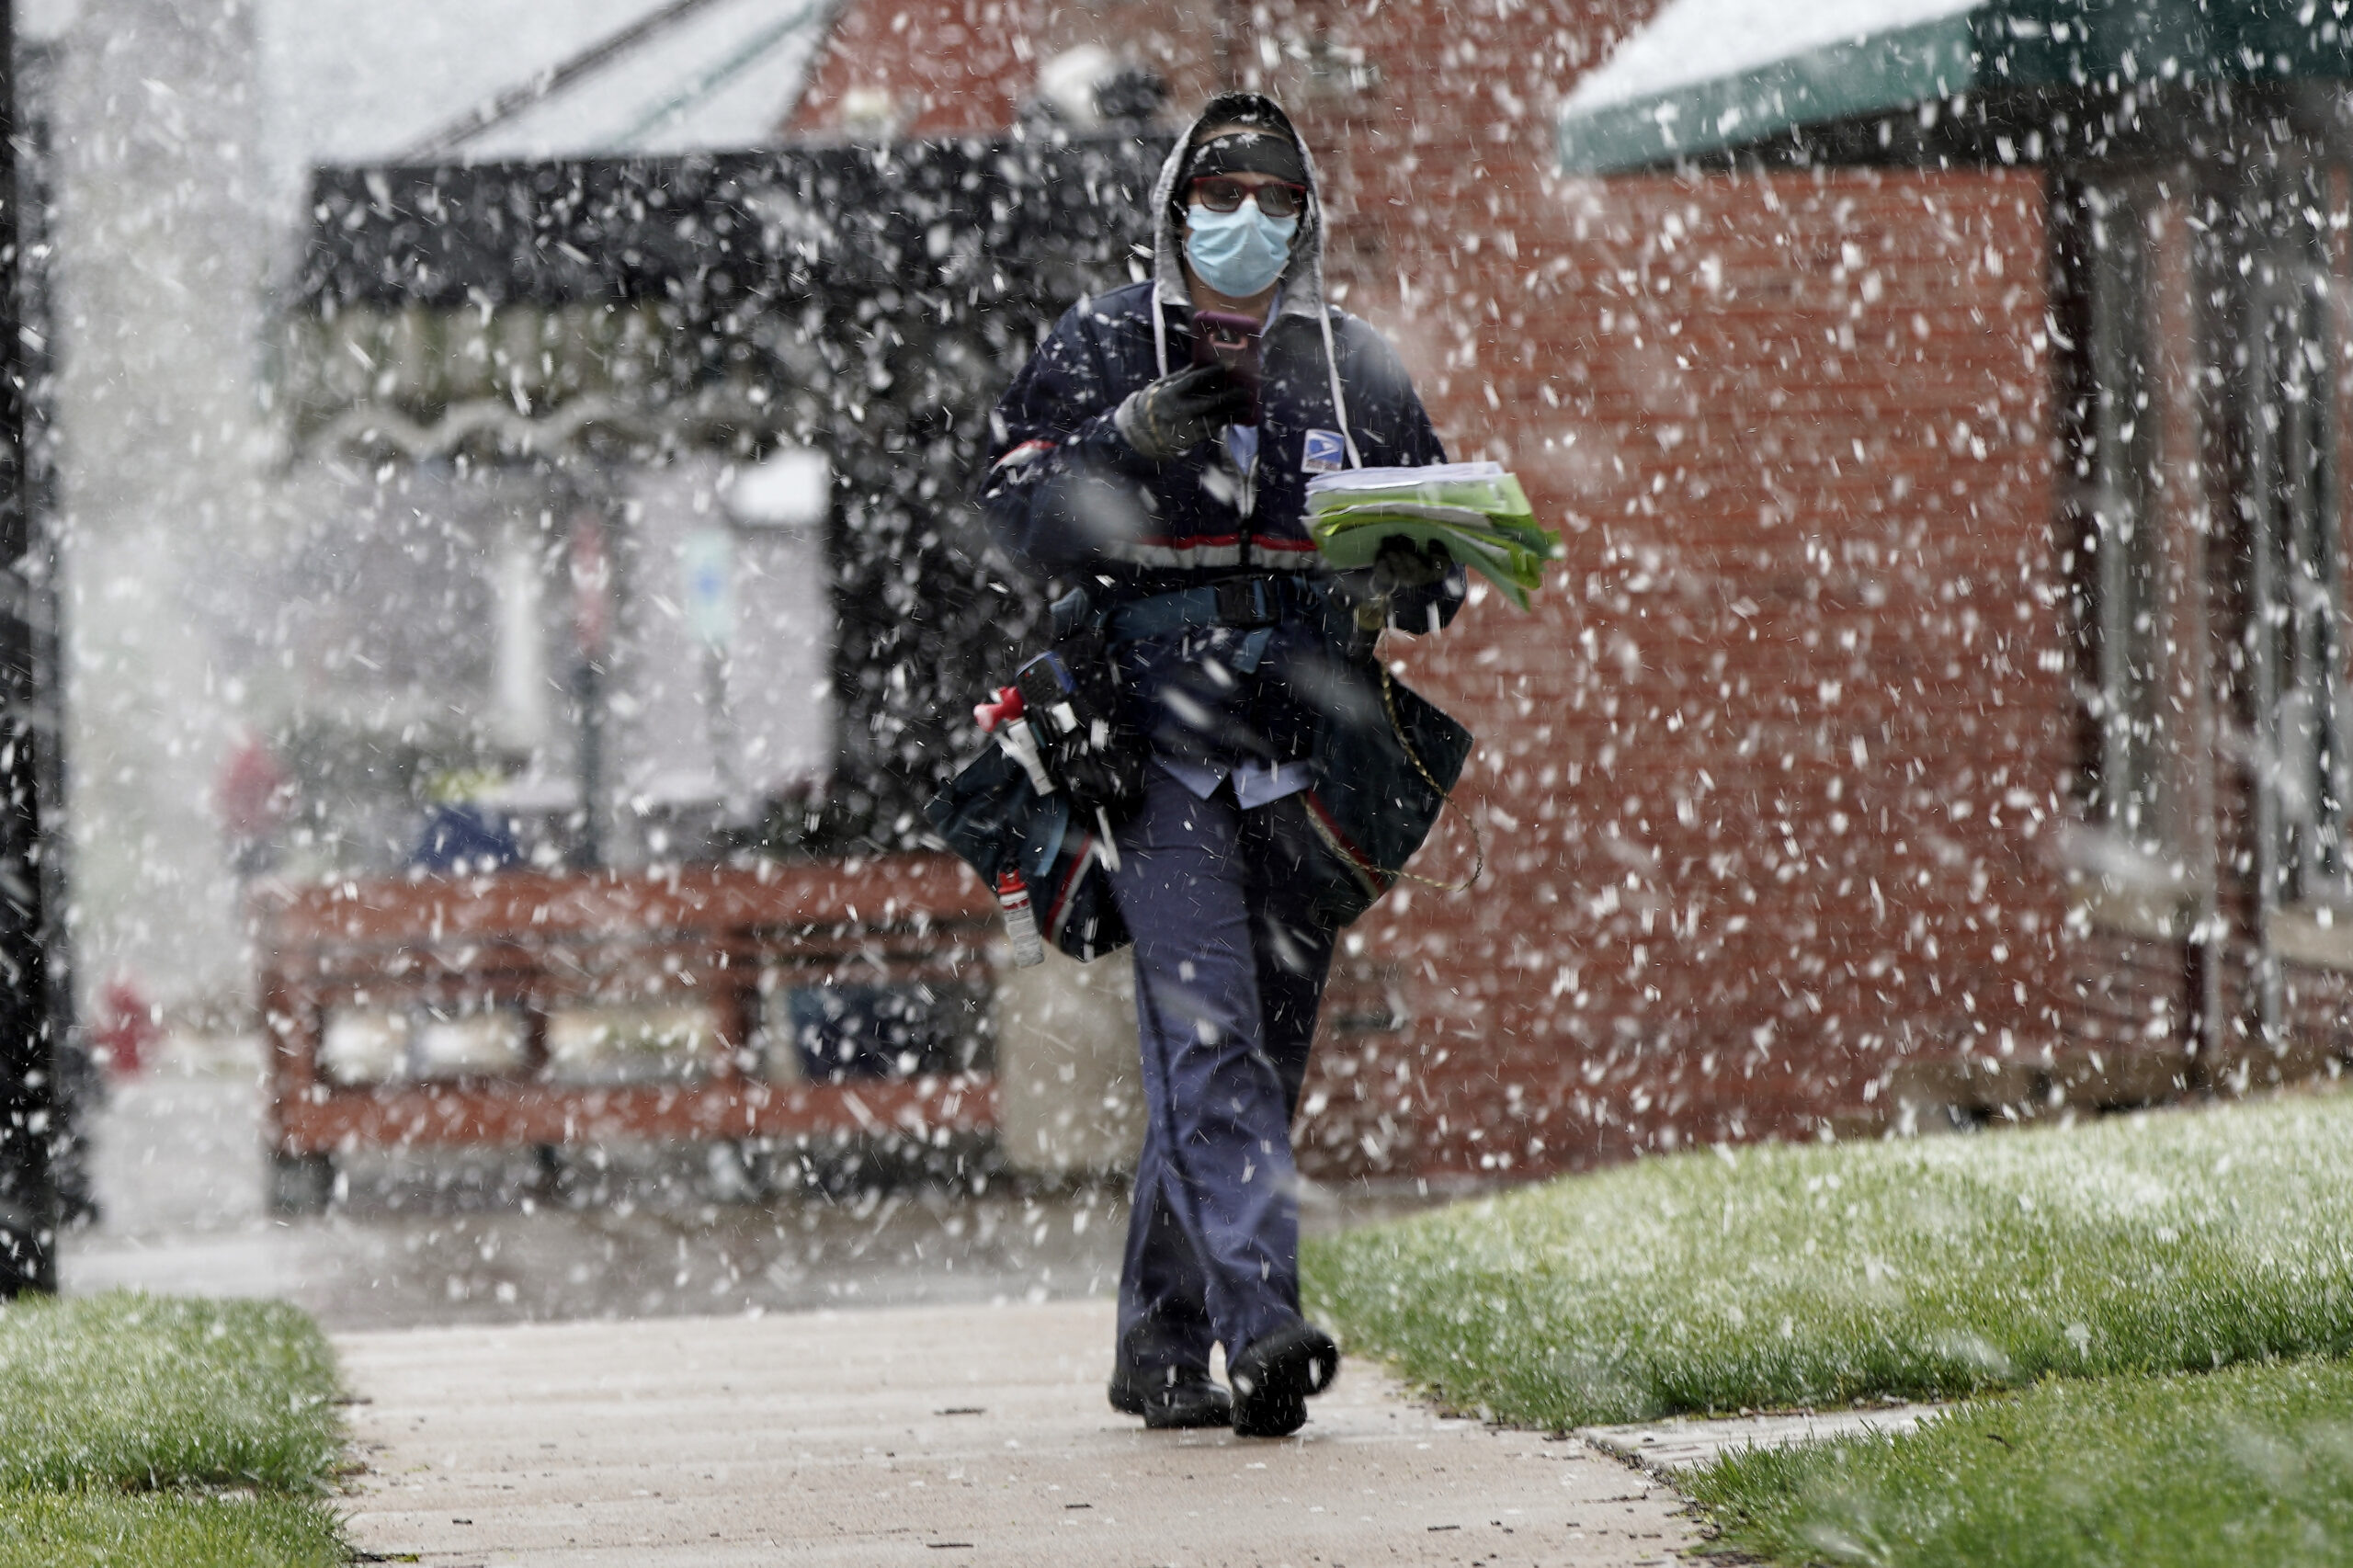 A USPS carrier wearing a face mask delivers mail in the snow